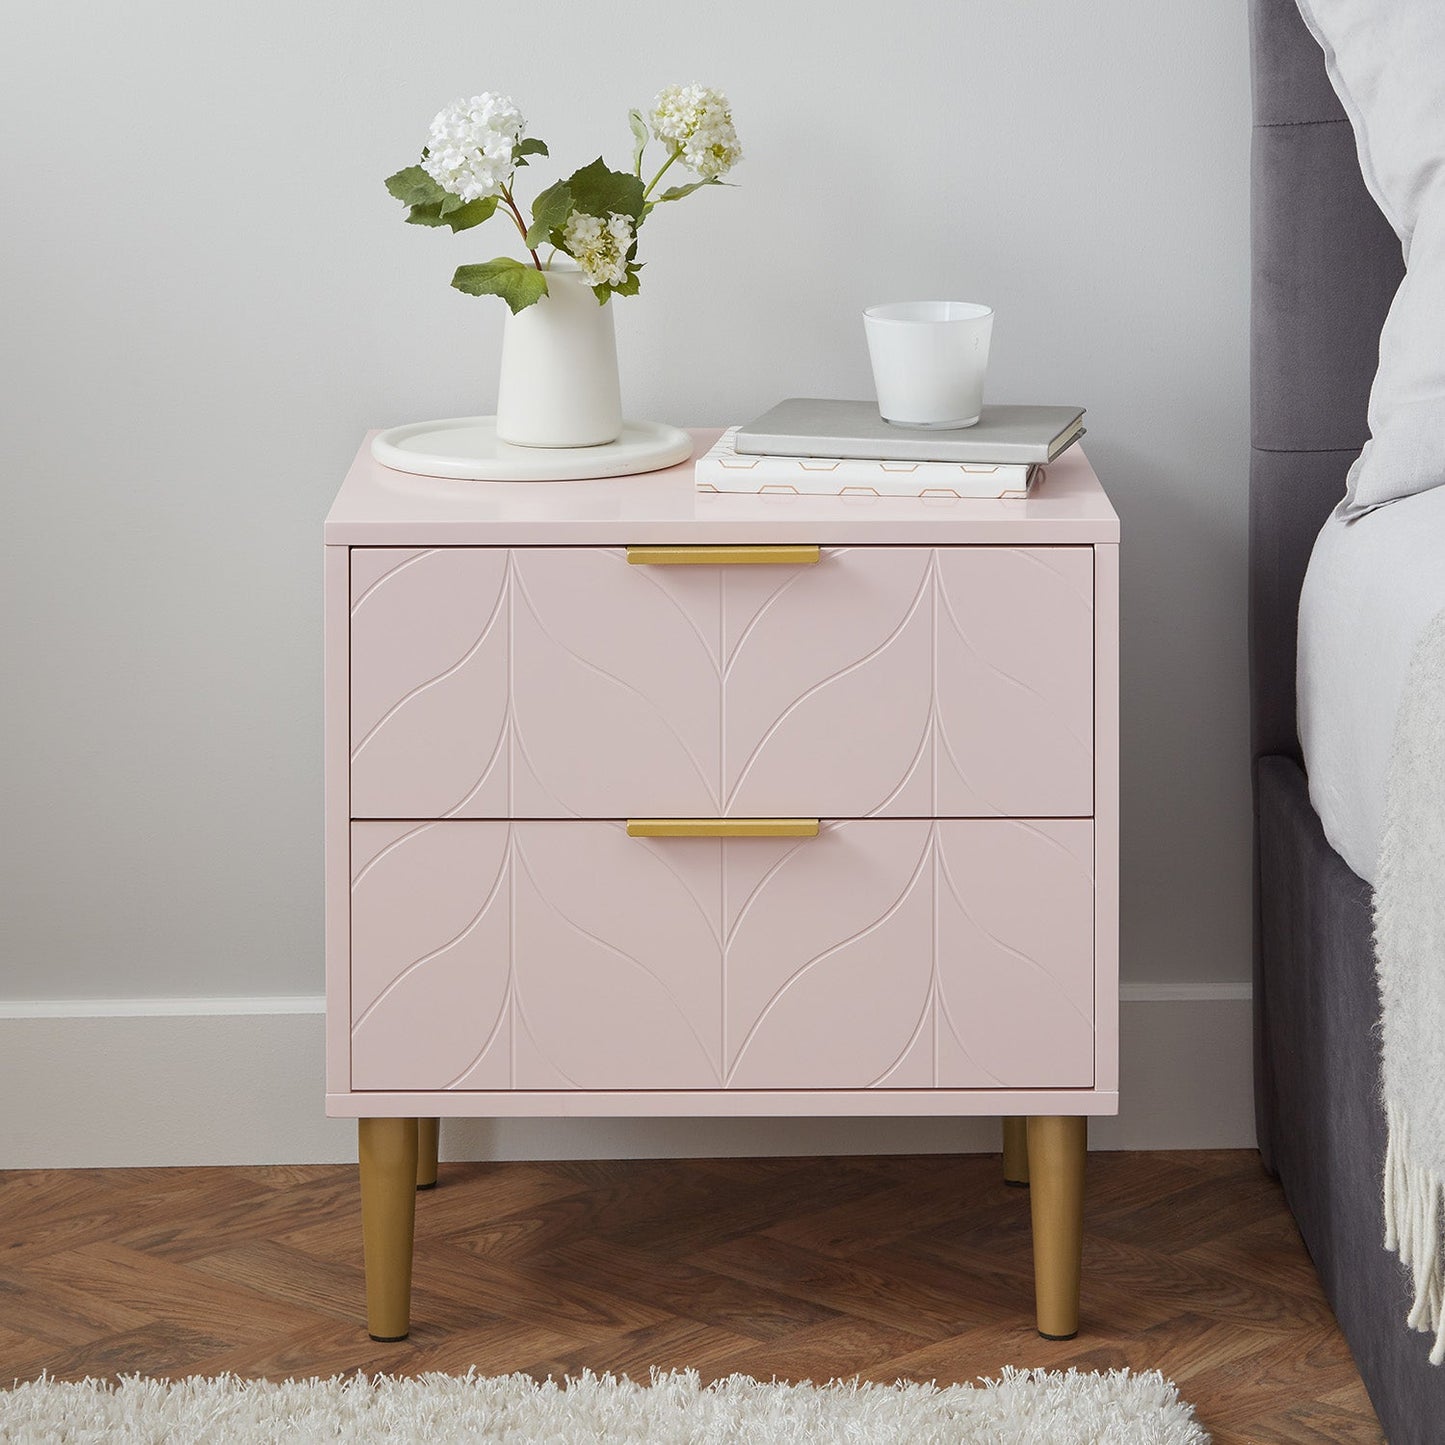 Gloria bedside tables - set of two - pale pink and brass effect - Laura James